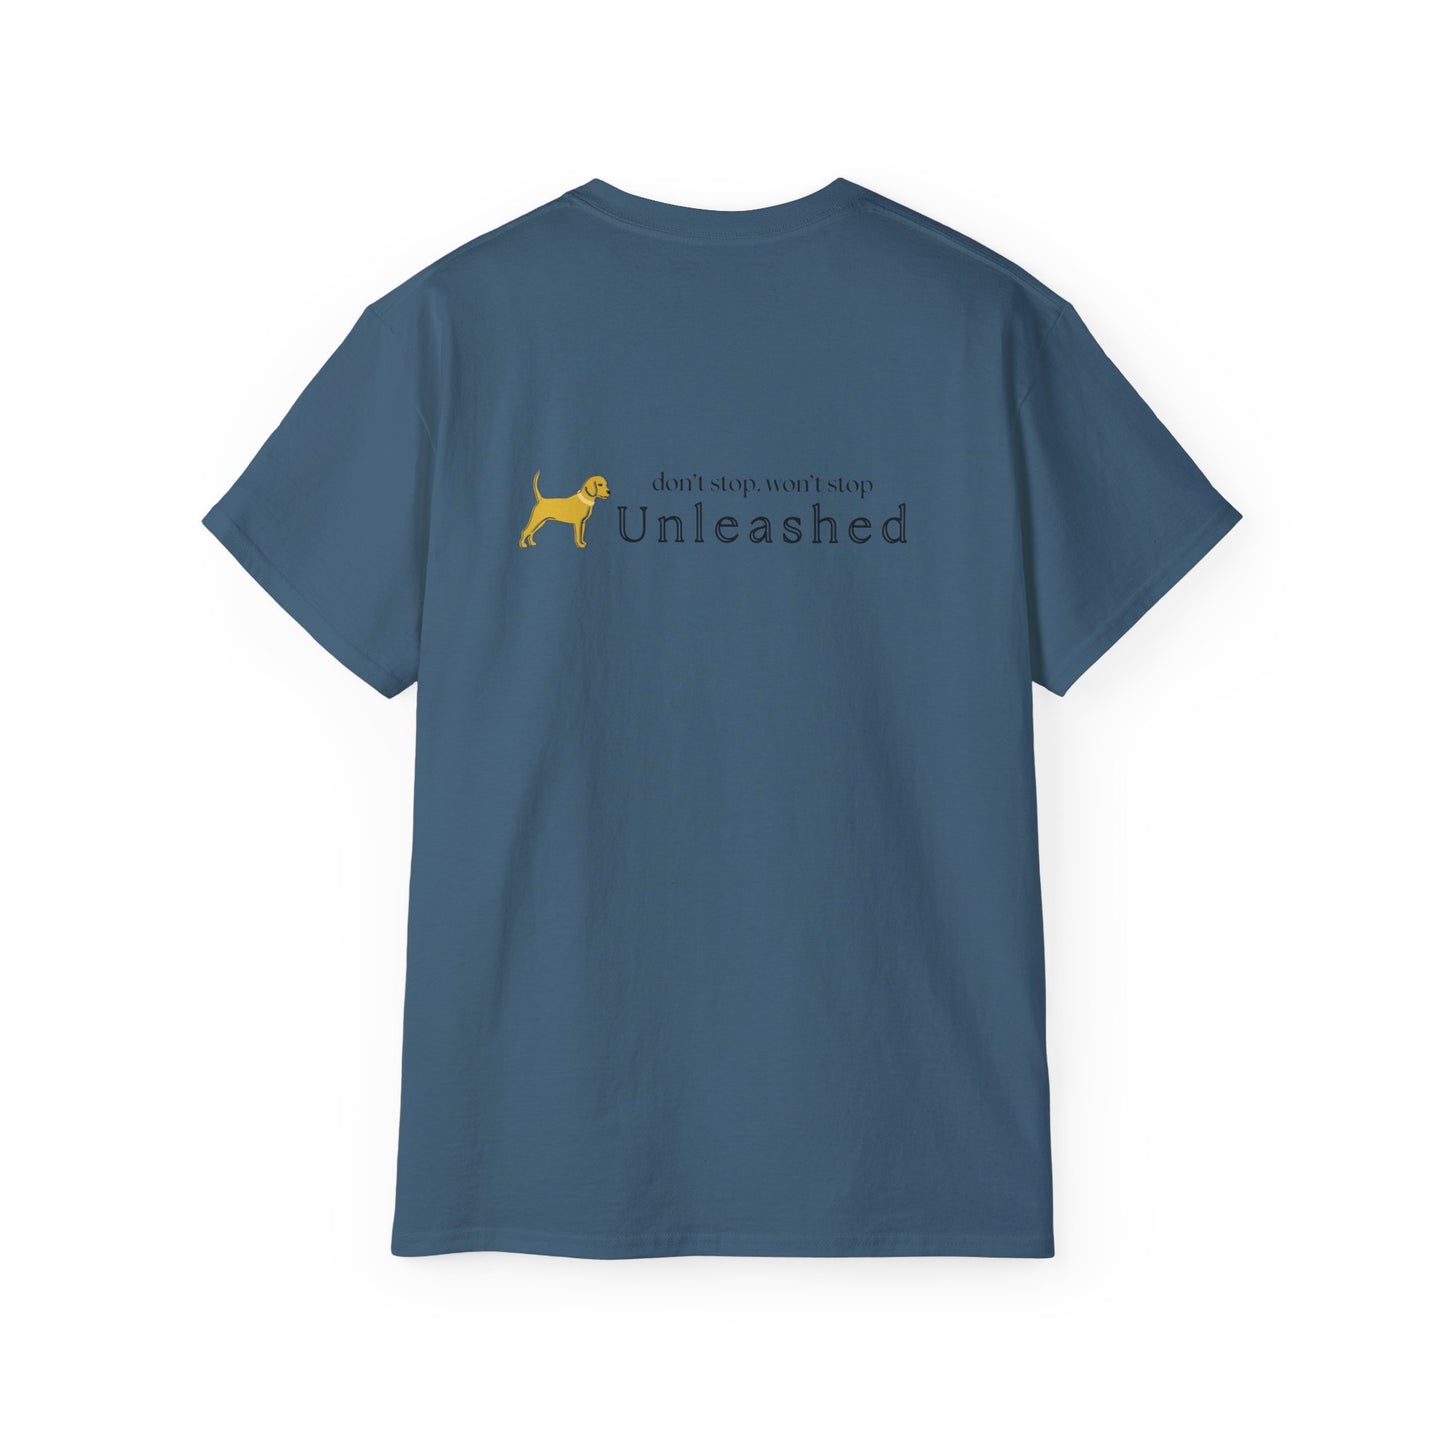 Unleashed Life Don't Stop Unleashed Short Sleeve Tee